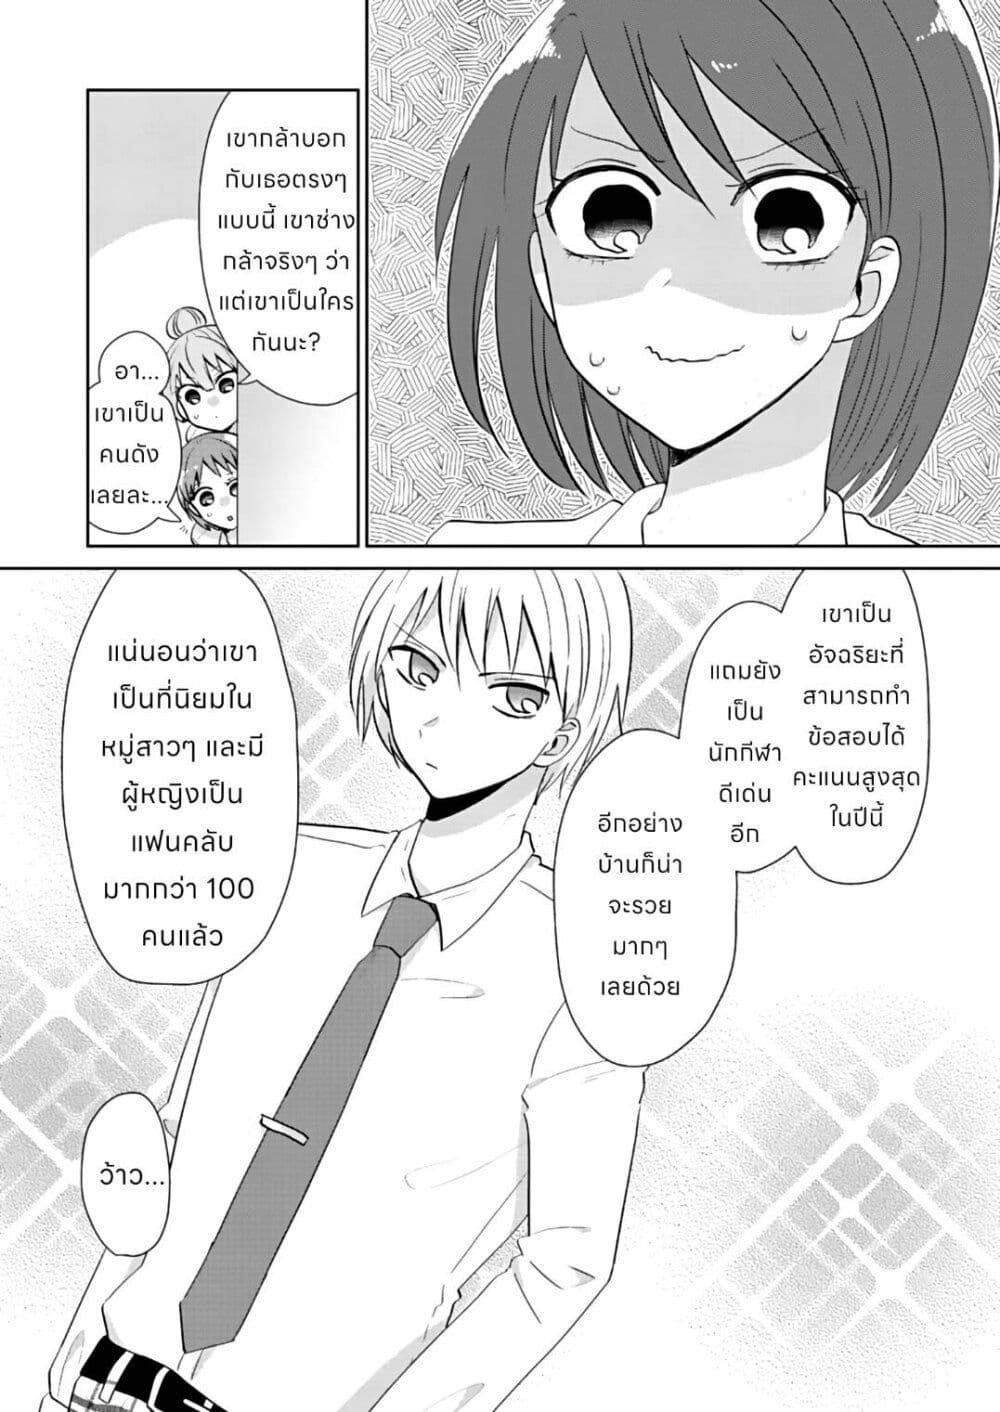 How to Start a Relationship With Crossdressing ตอนที่ 1.2 (4)